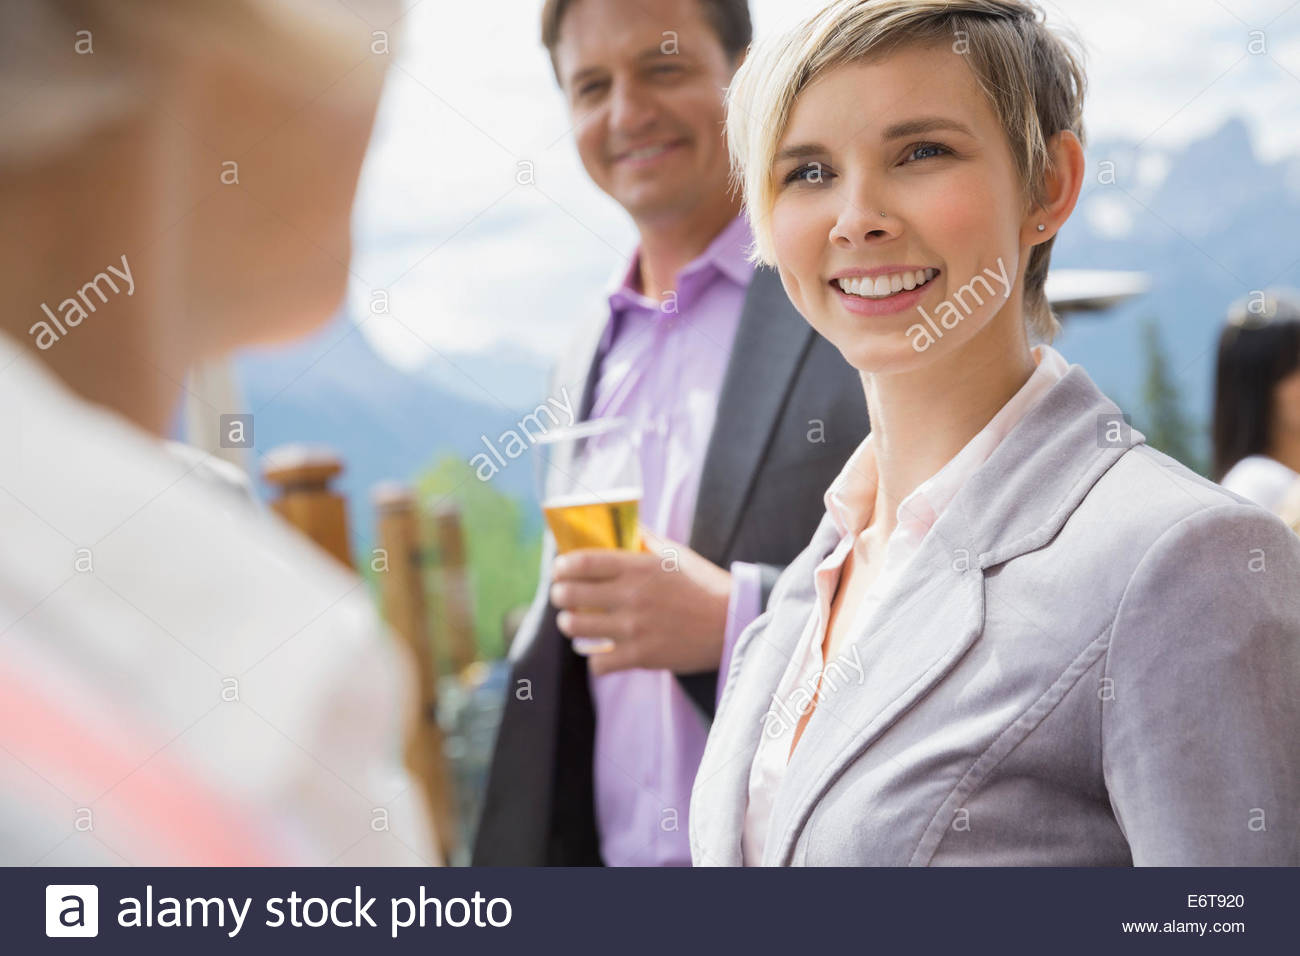 Business people talking at networking event Stock Photo